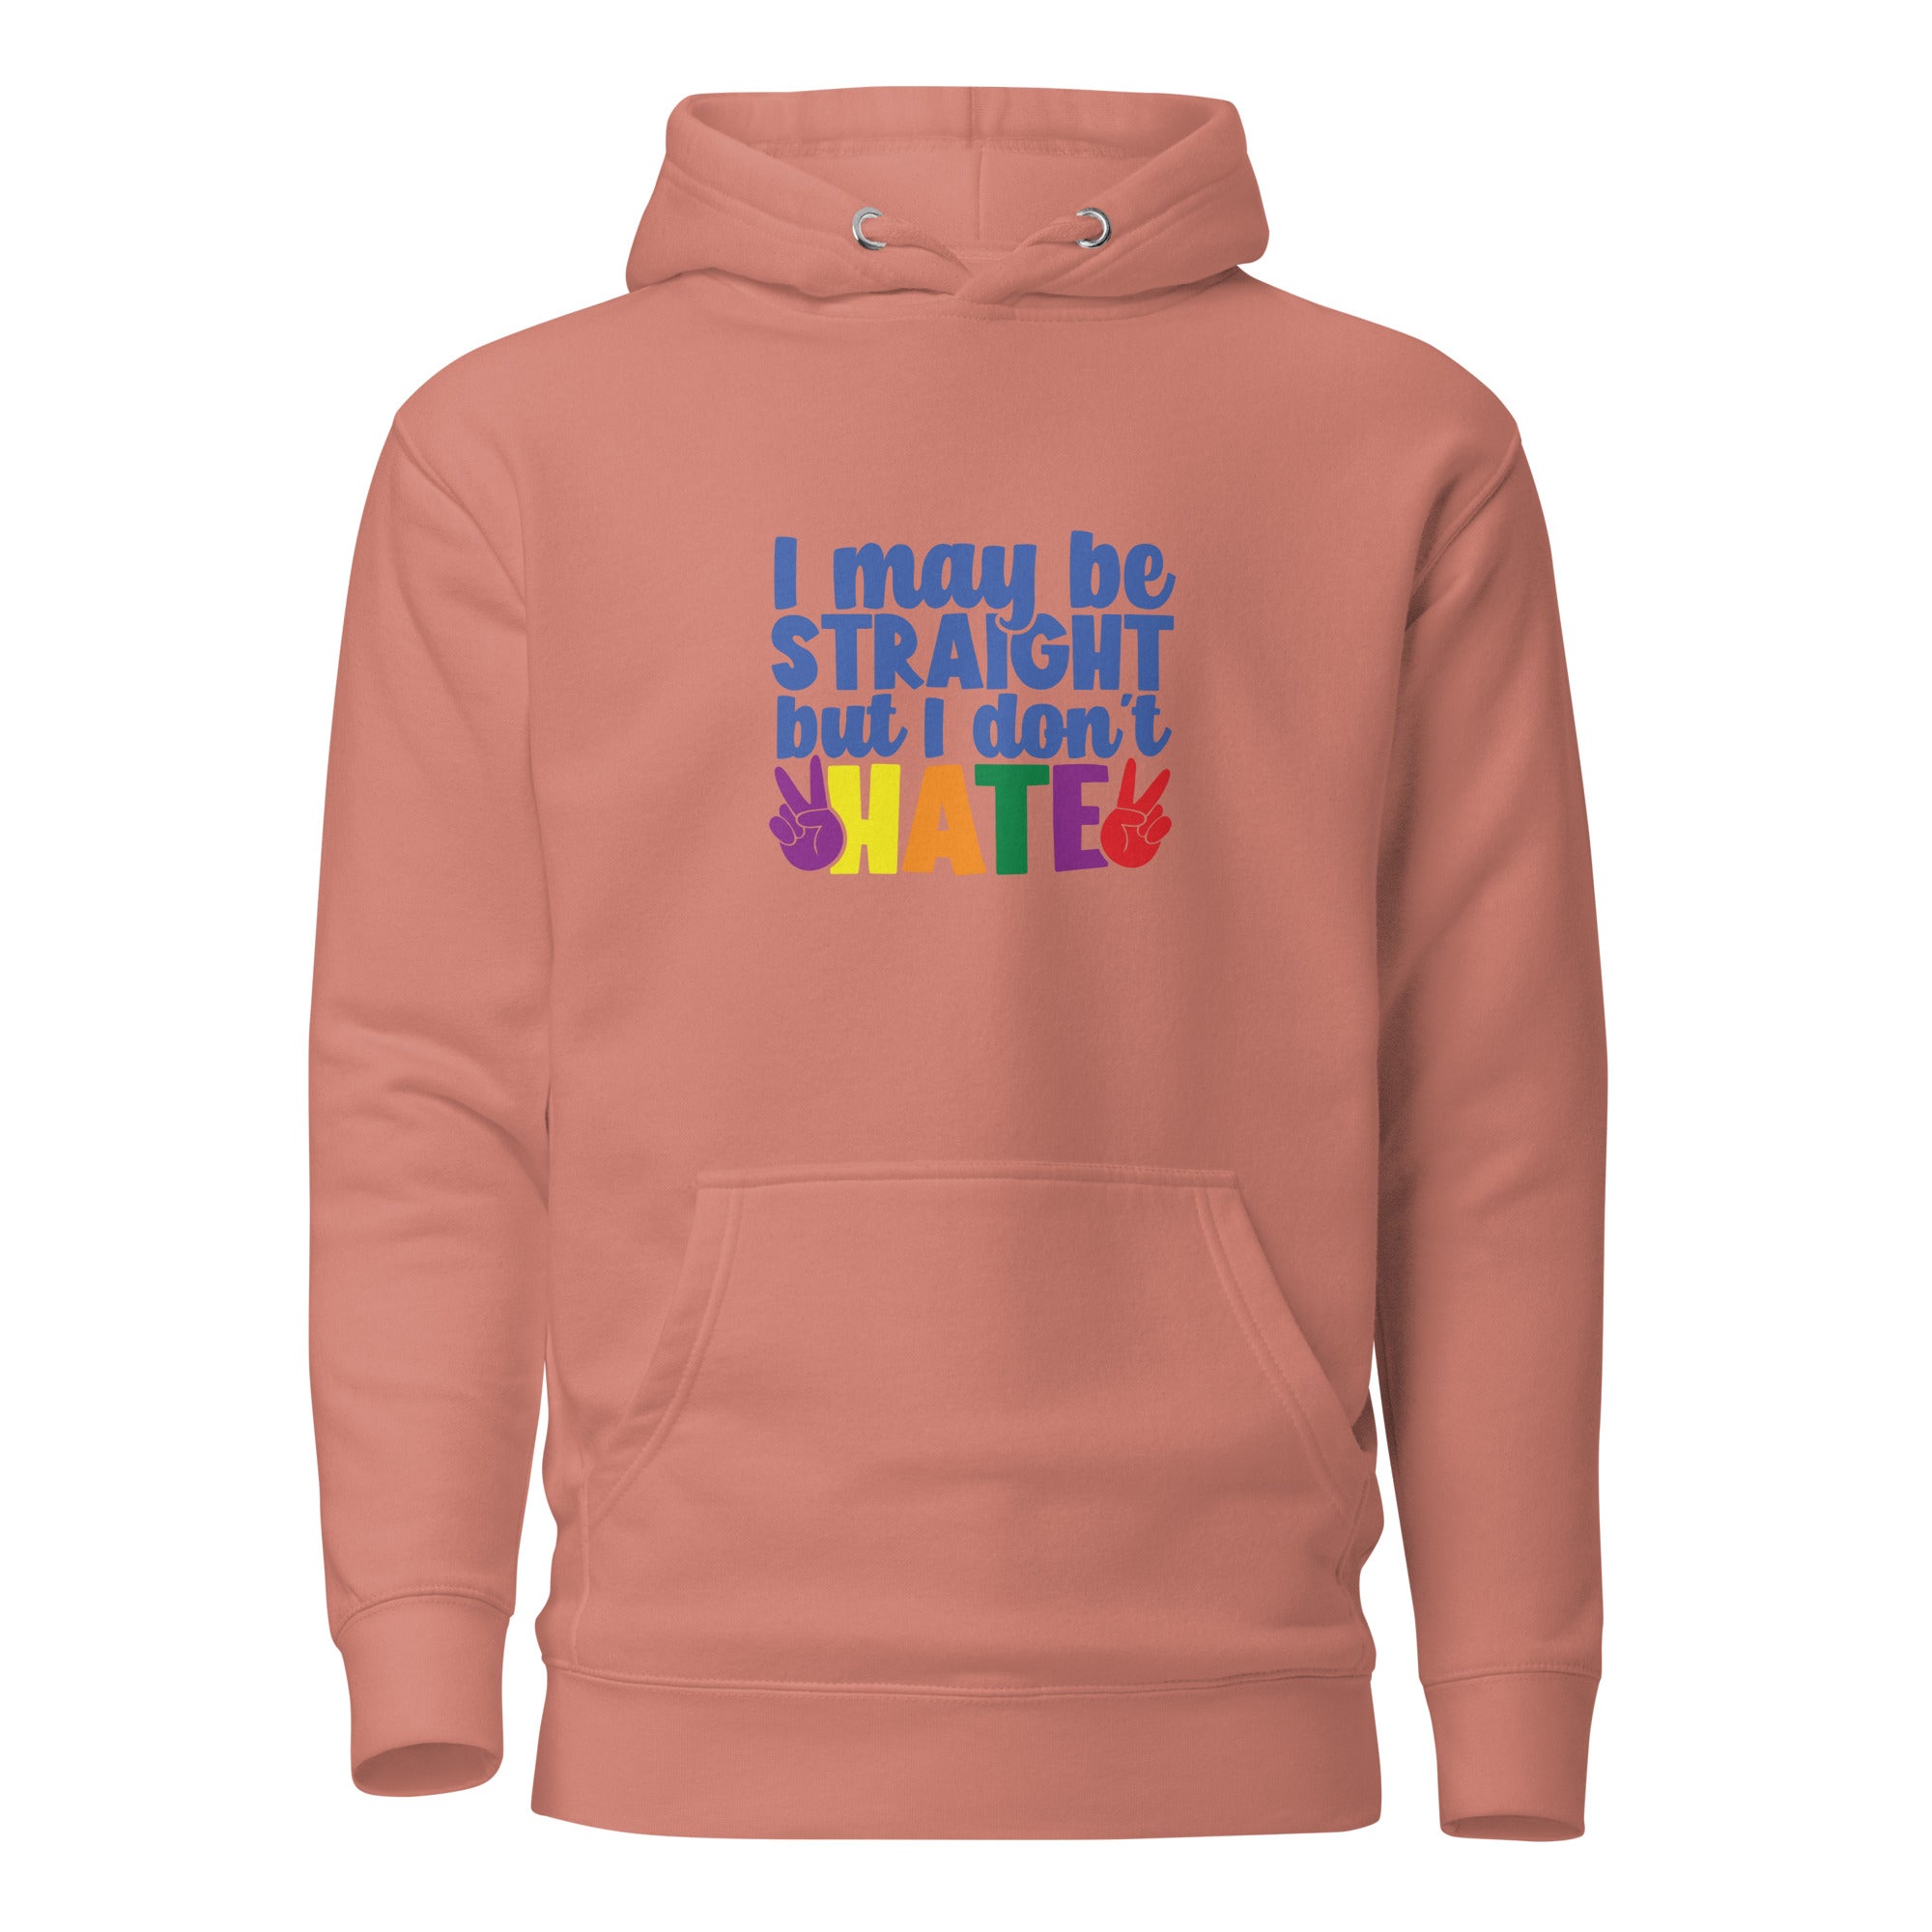 Unisex Hoodie- I may be straight but I don't hate